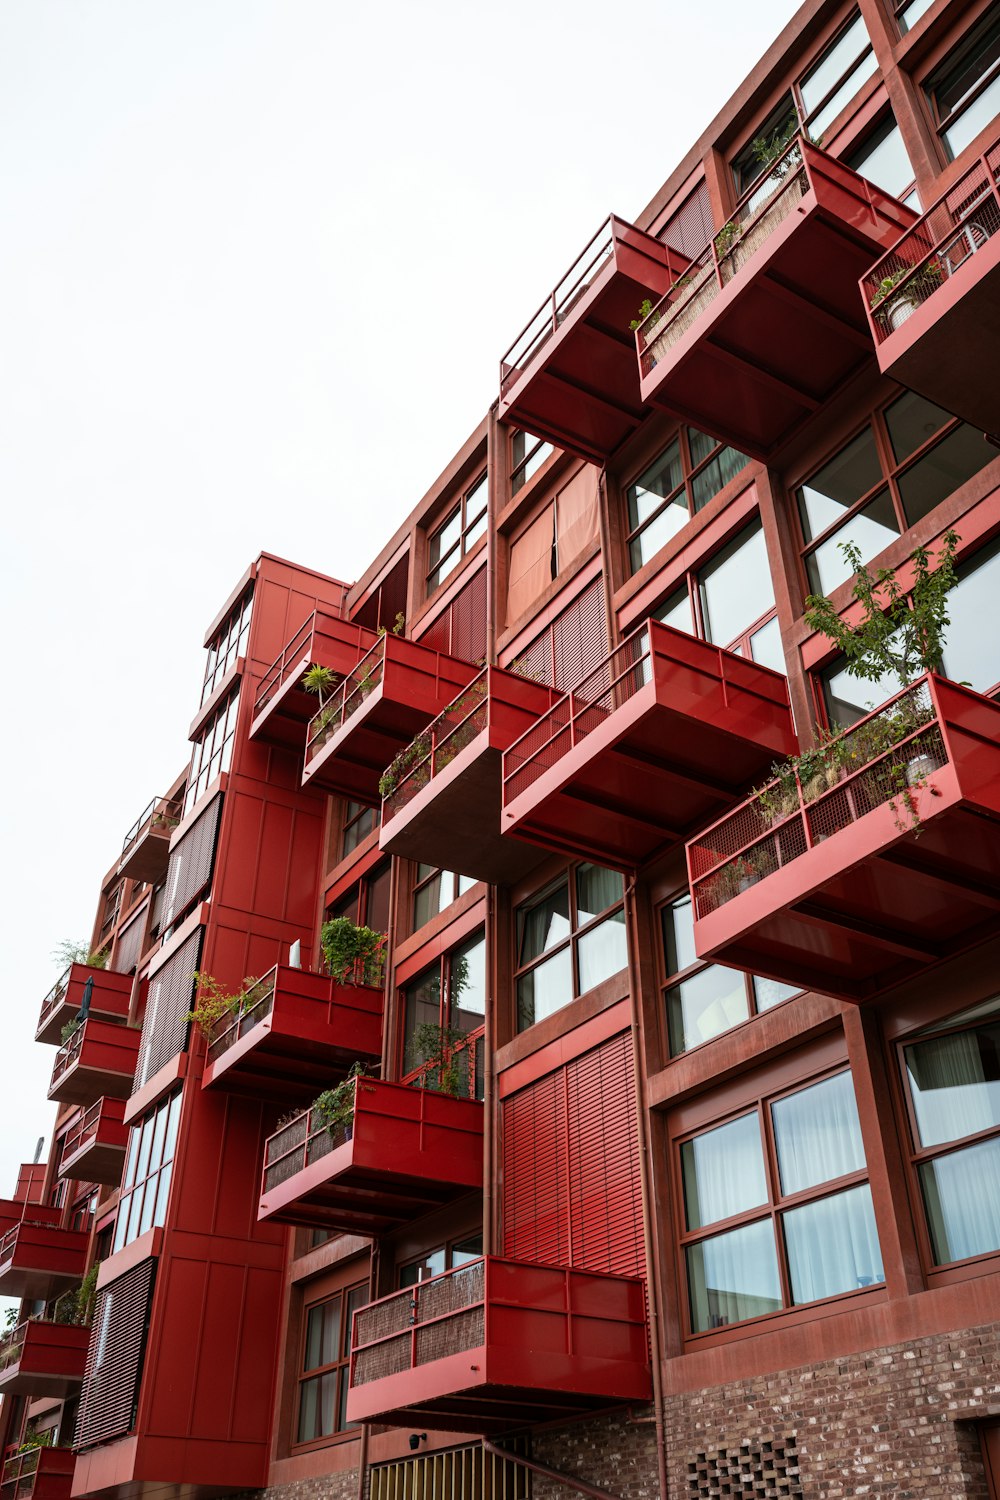 a tall red building with balconies and plants on the balconies